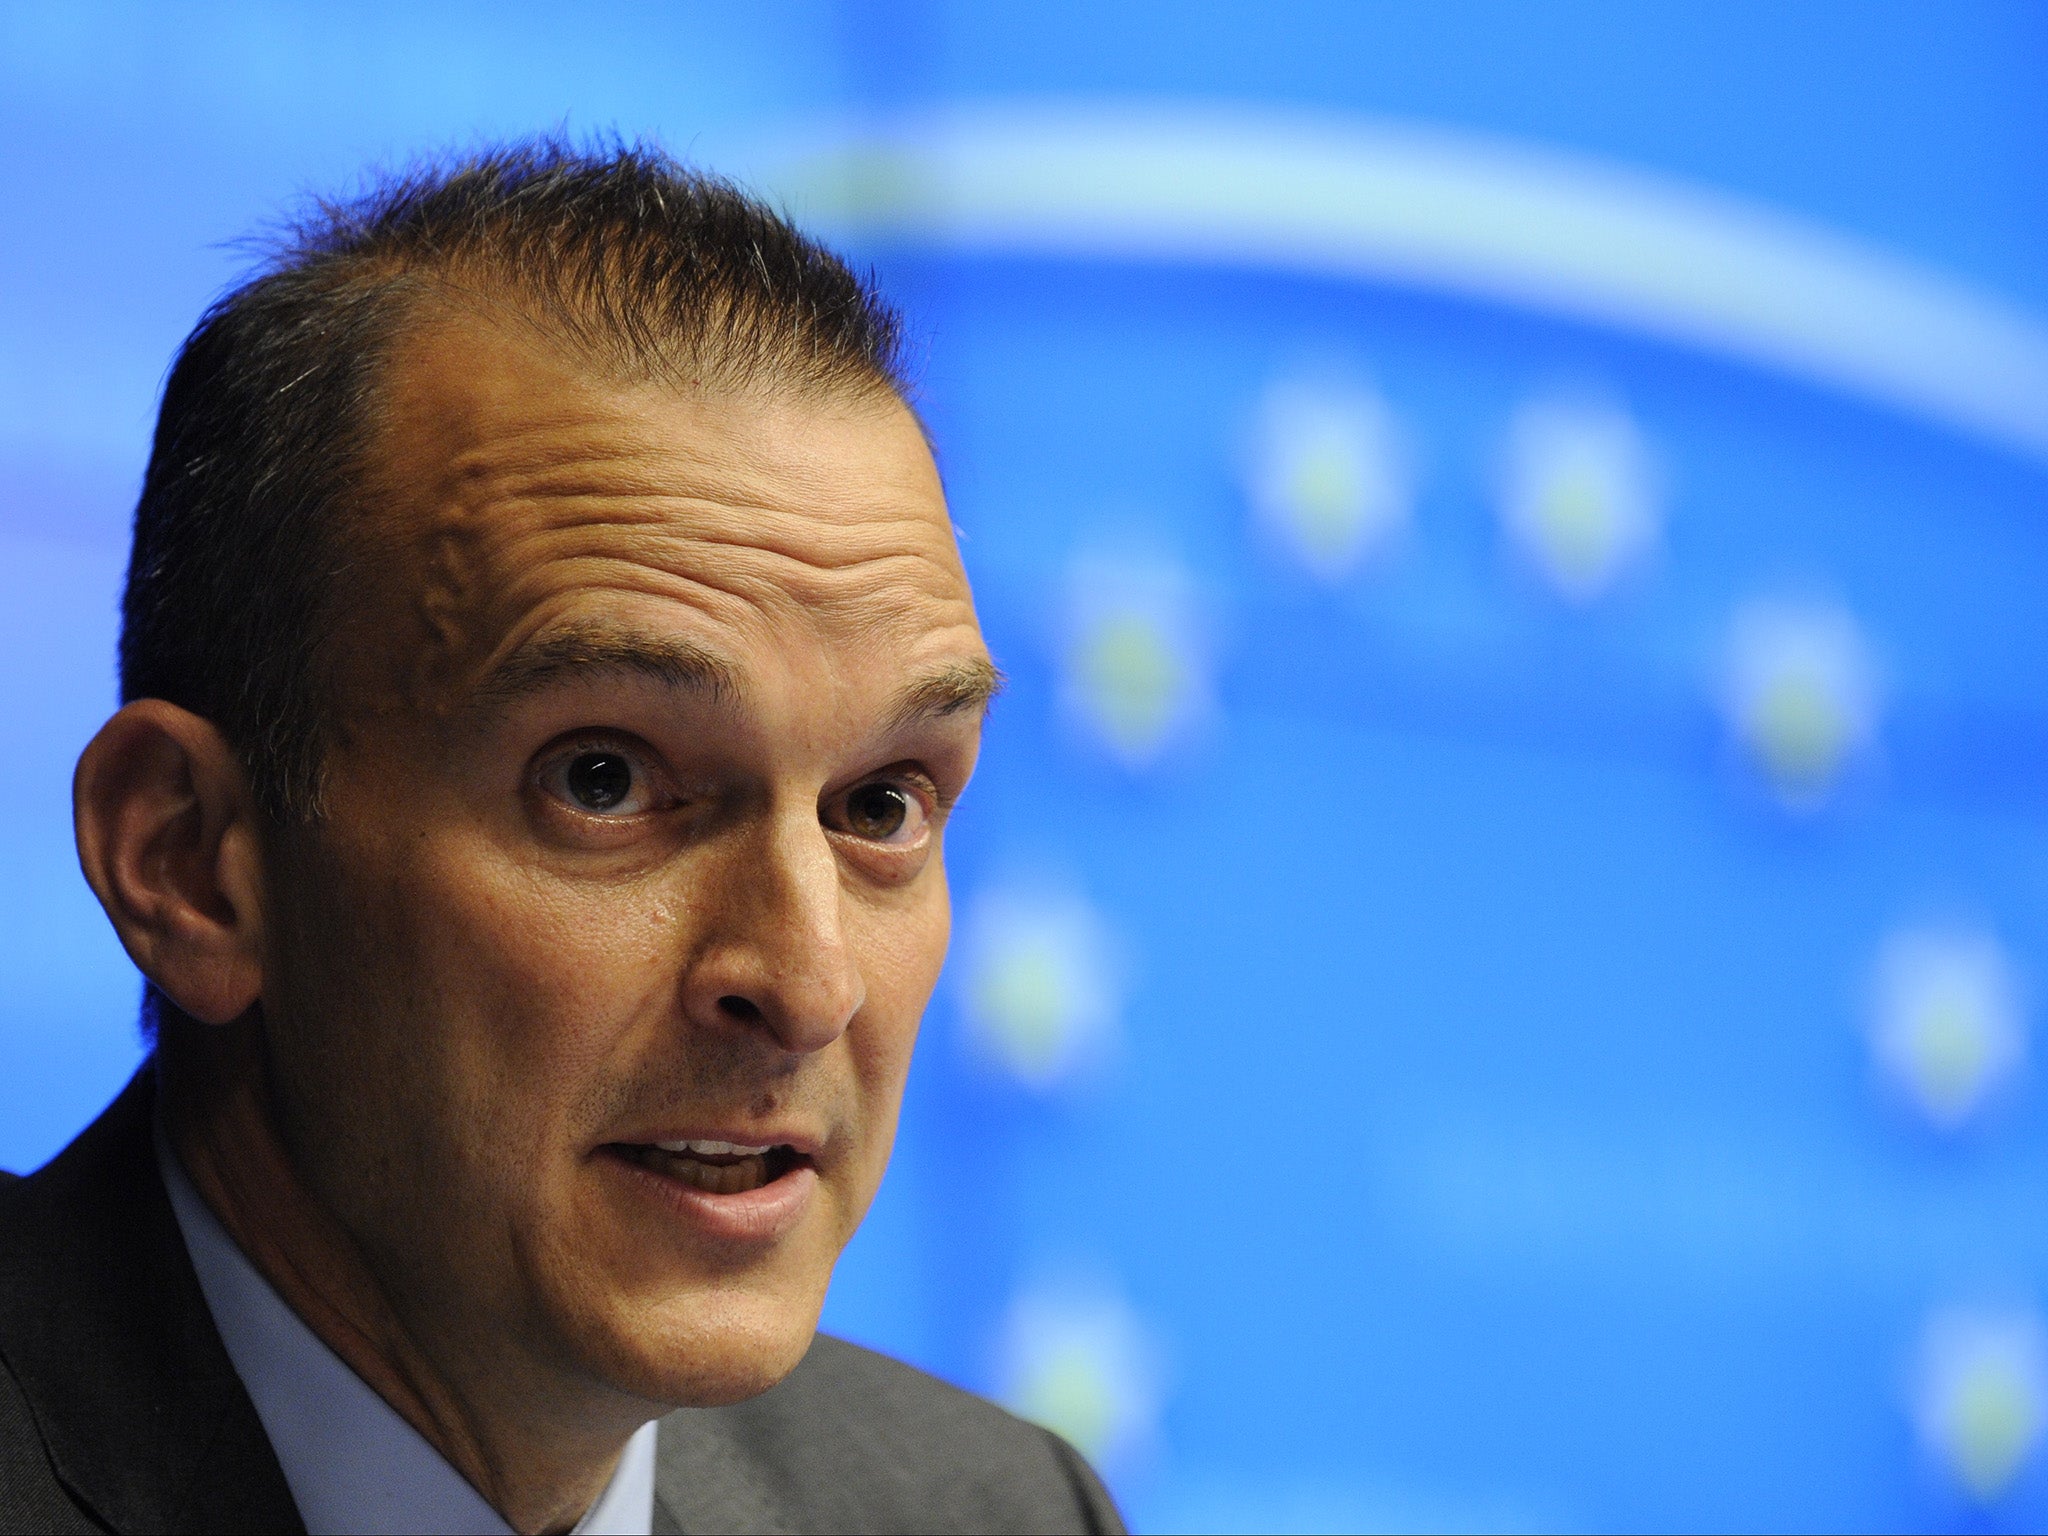 Travis Tygart called the Fancy Bears 'desperate' and 'malicious'